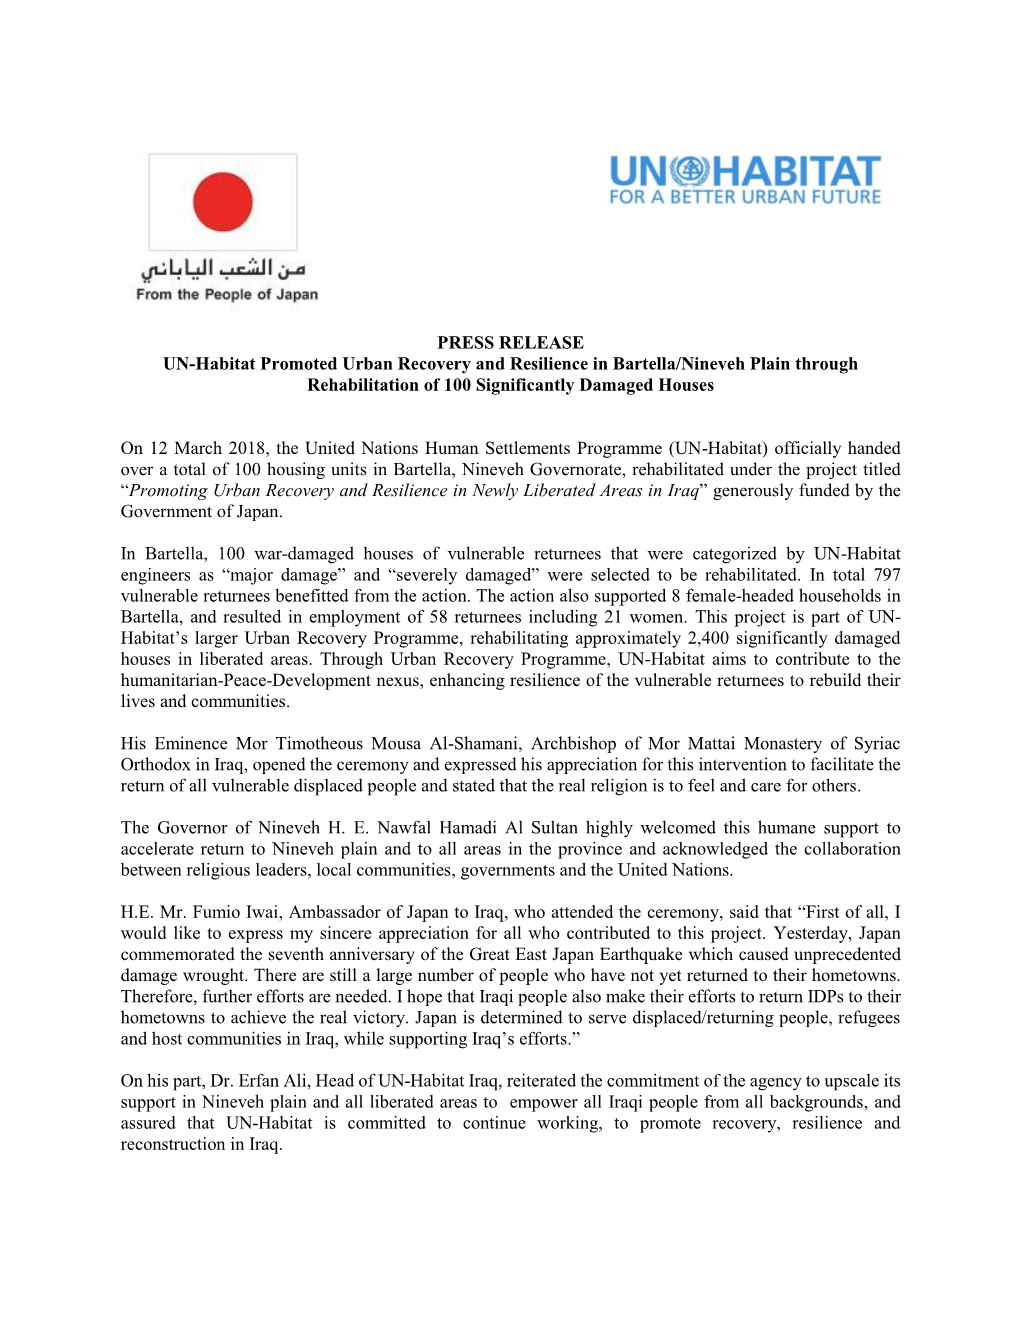 PRESS RELEASE UN-Habitat Promoted Urban Recovery and Resilience in Bartella/Nineveh Plain Through Rehabilitation of 100 Significantly Damaged Houses